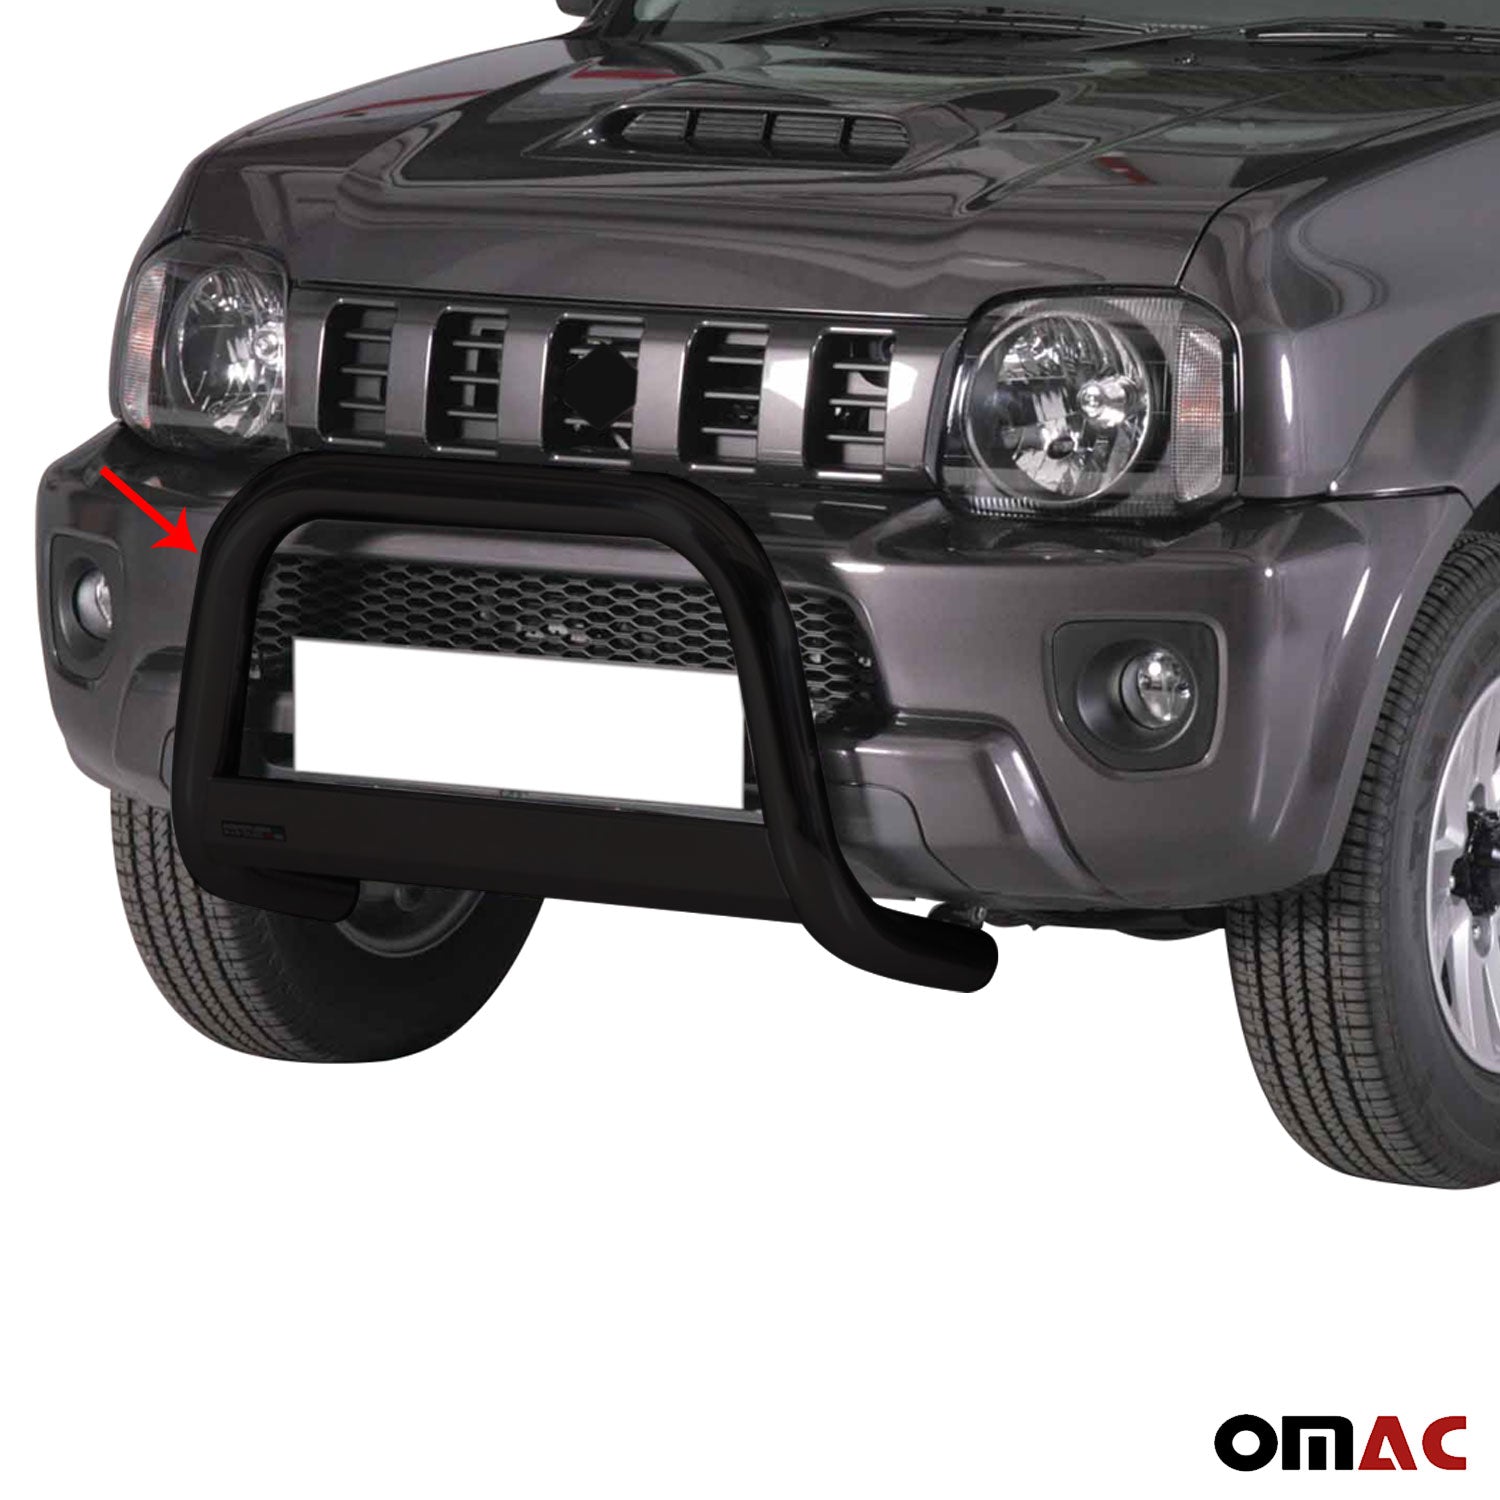 Stainless steel front guard for Suzuki Jimny 2012-2017 Black